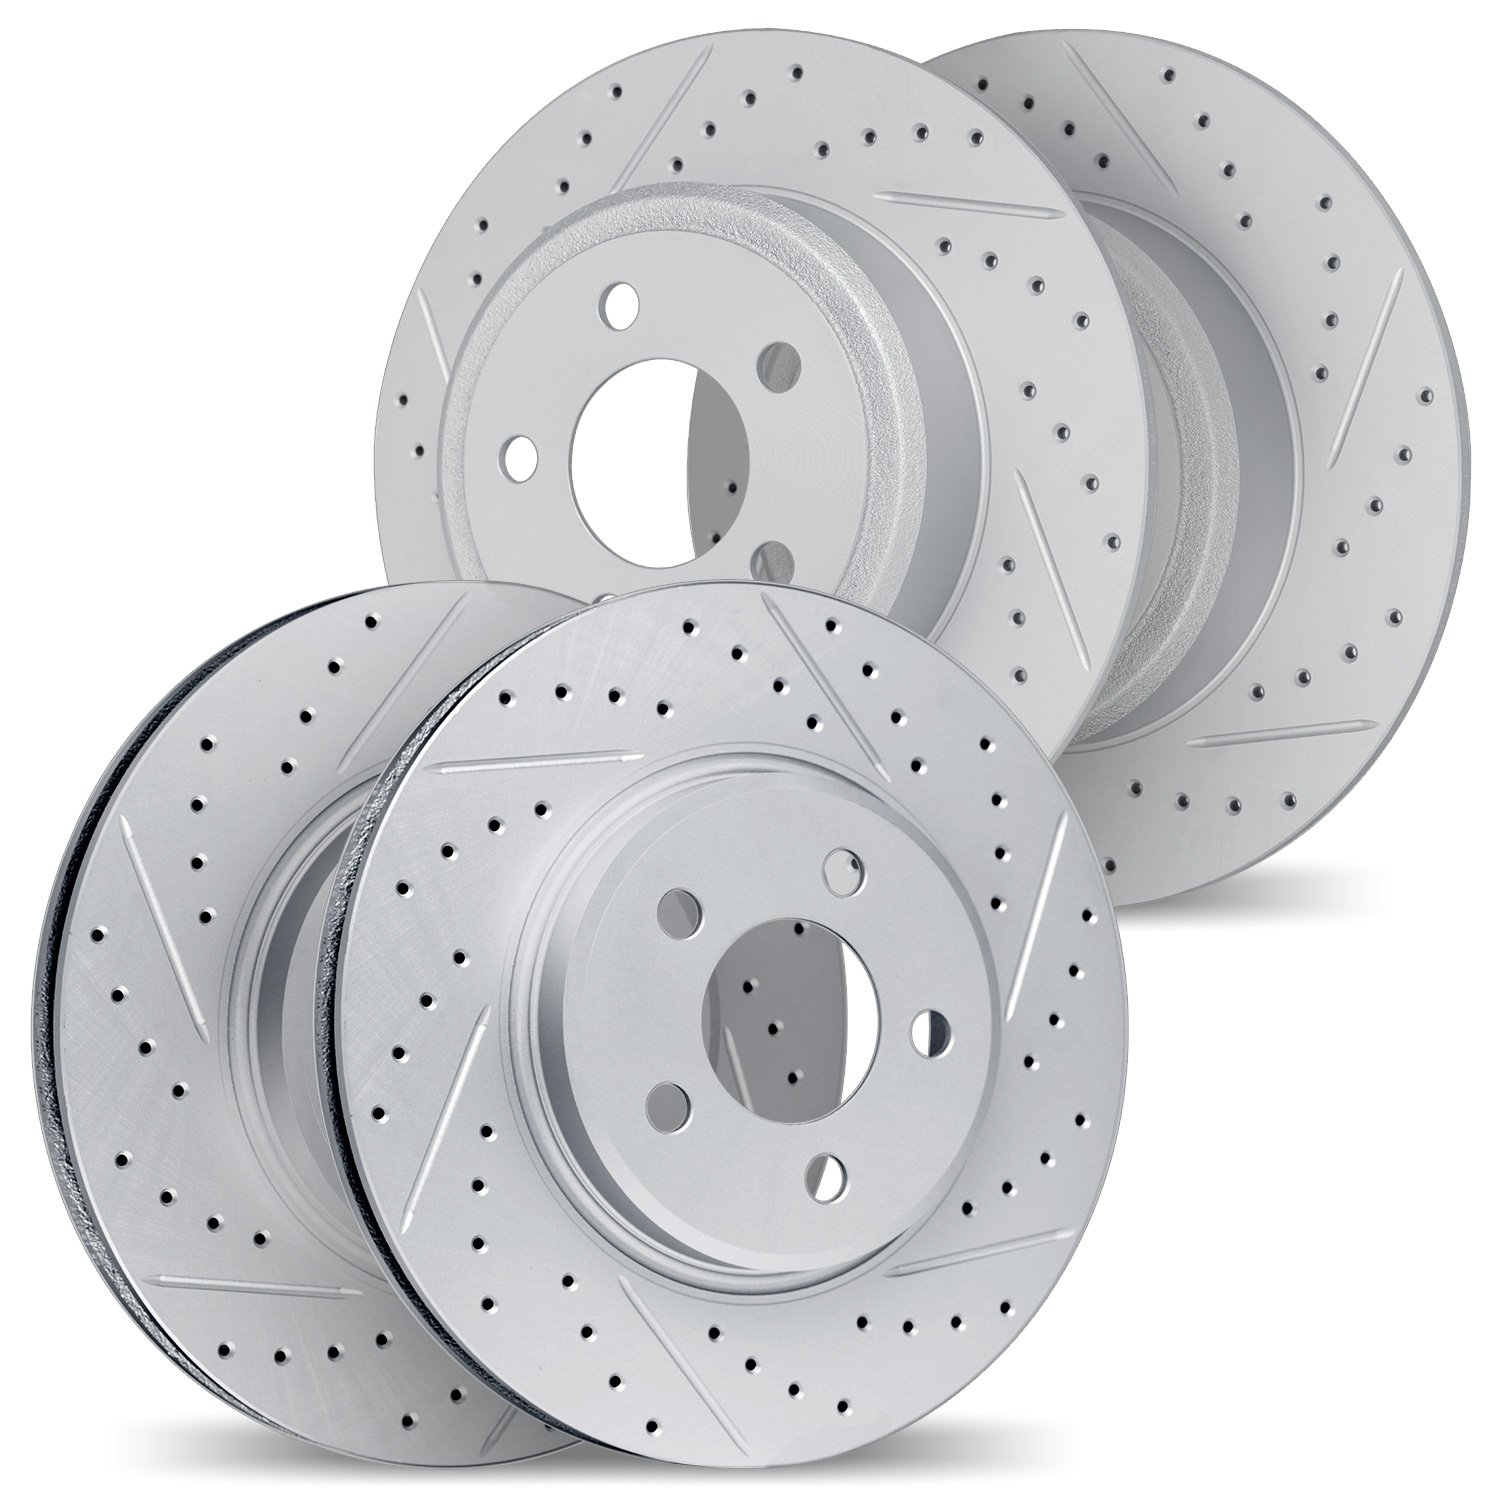 2004-73019 Geoperformance Drilled/Slotted Brake Rotors, 1999-2005 Audi/Volkswagen, Position: Front and Rear